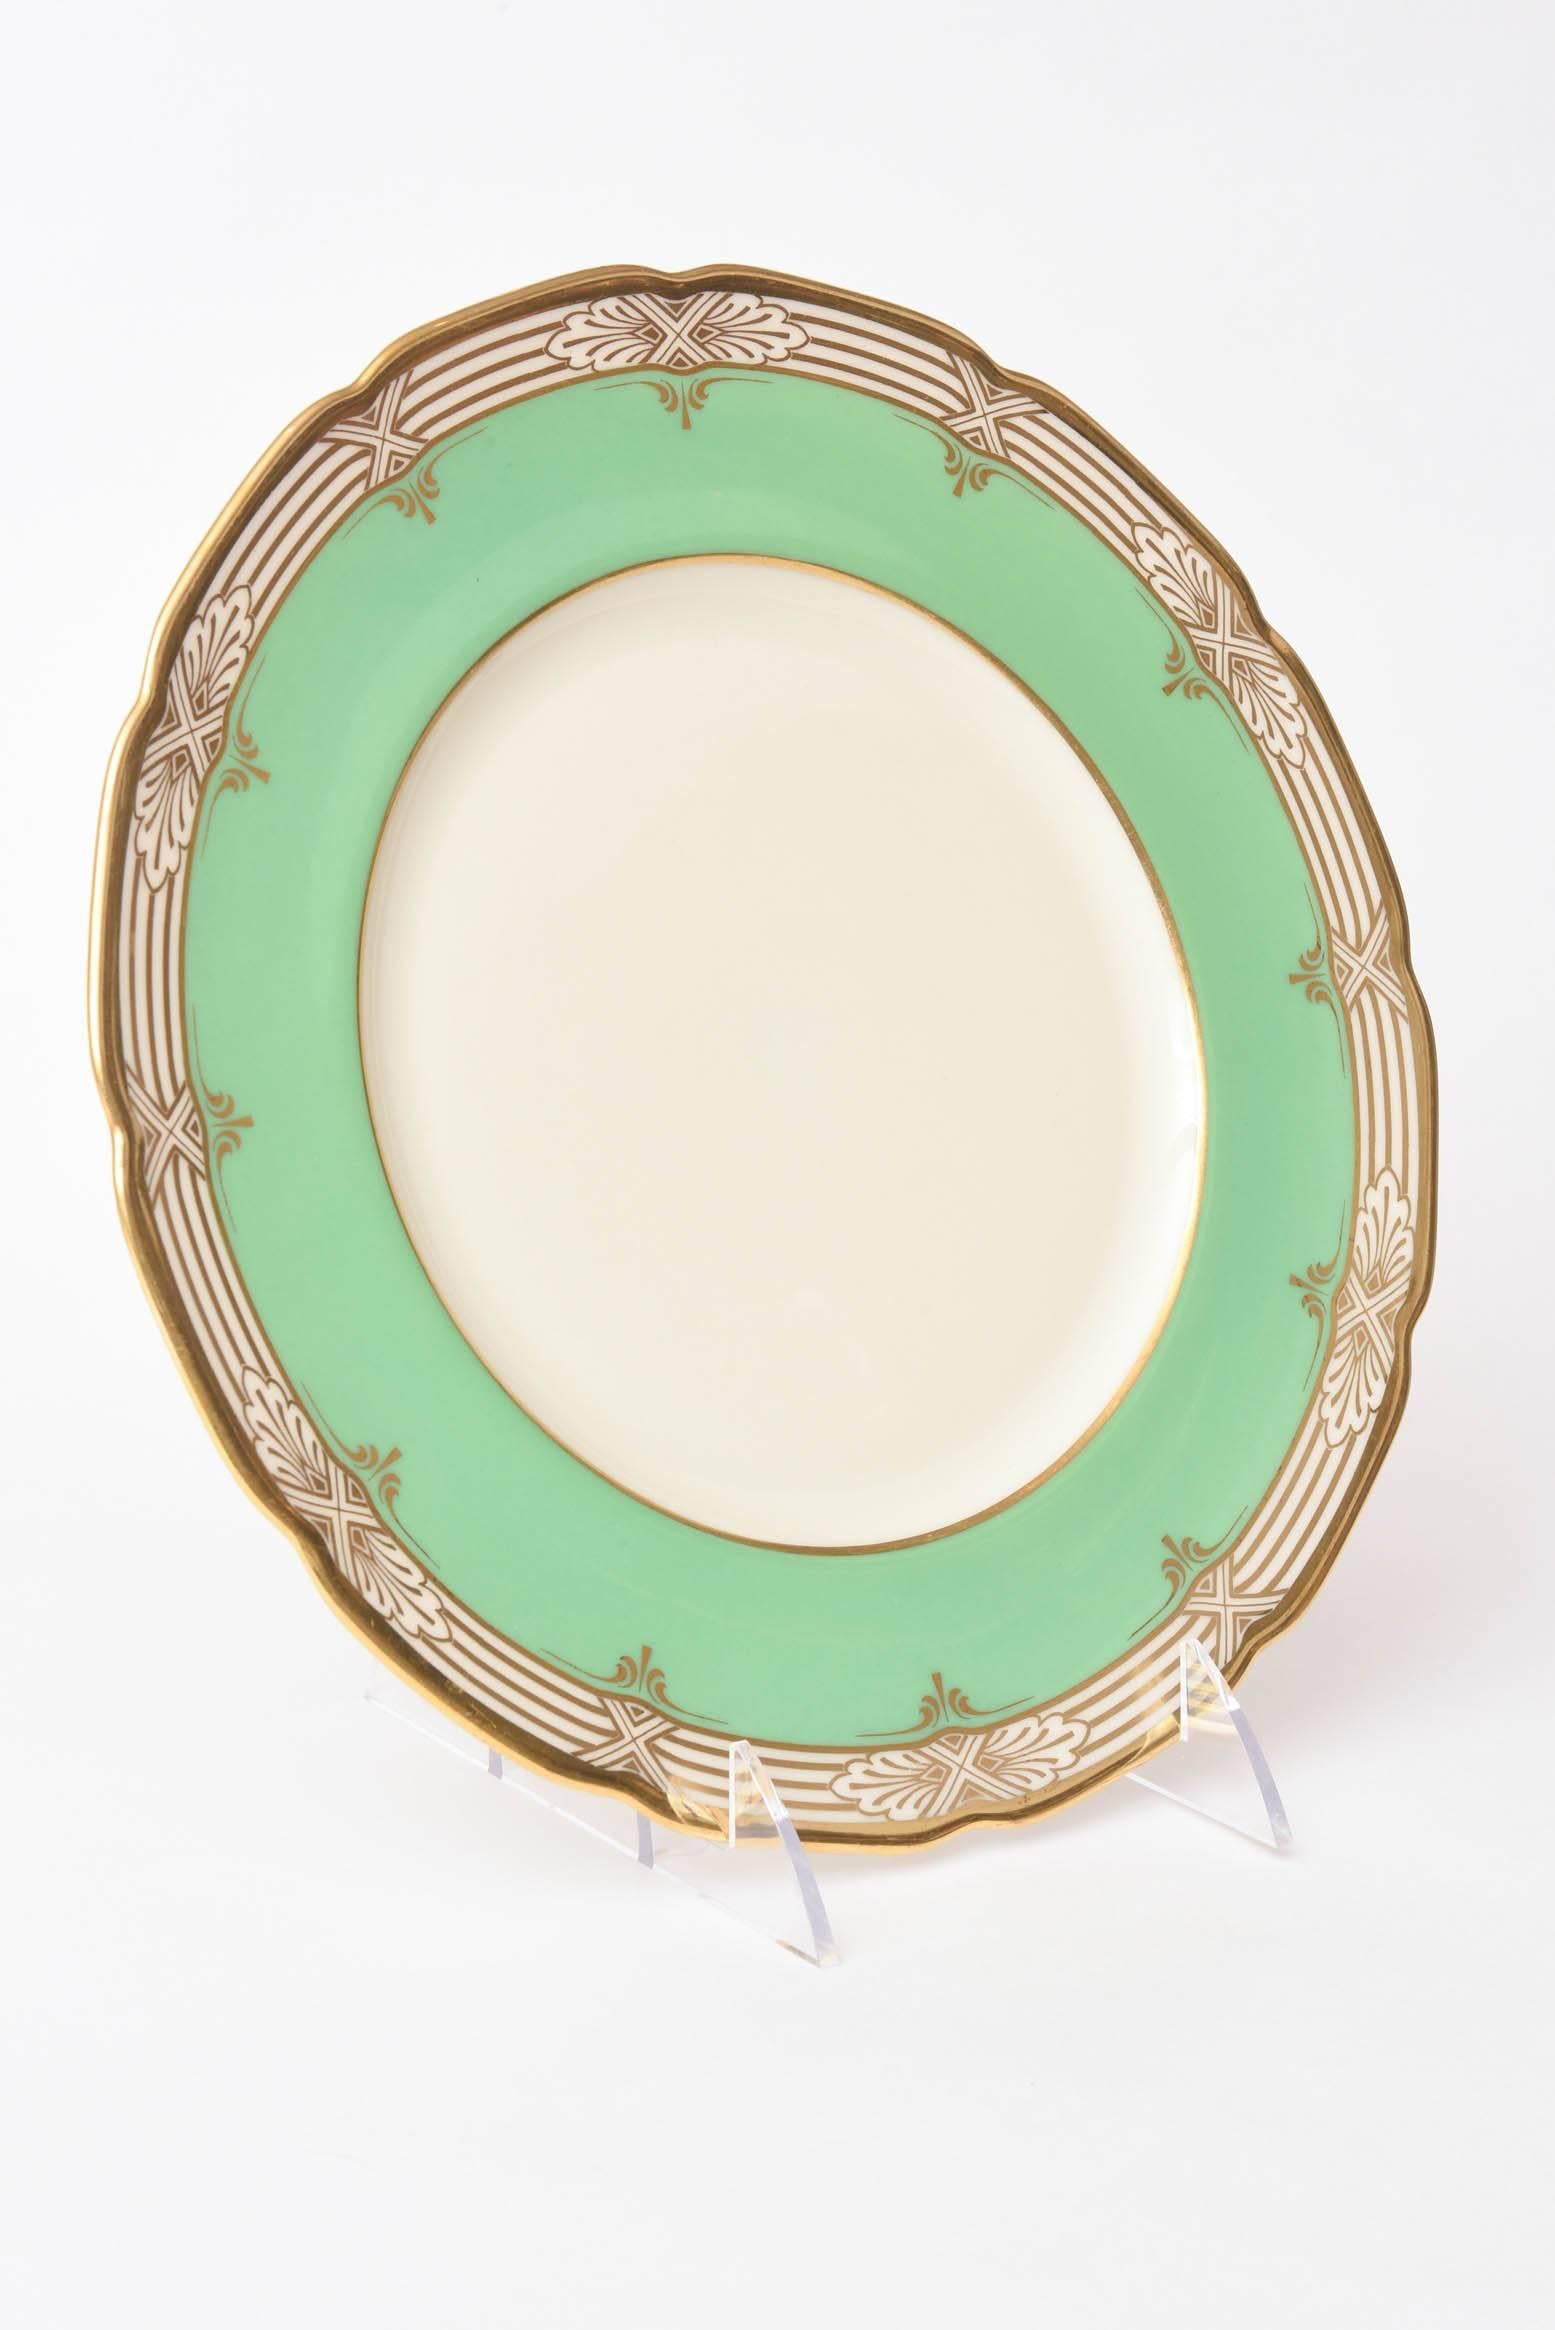 green and gold plates